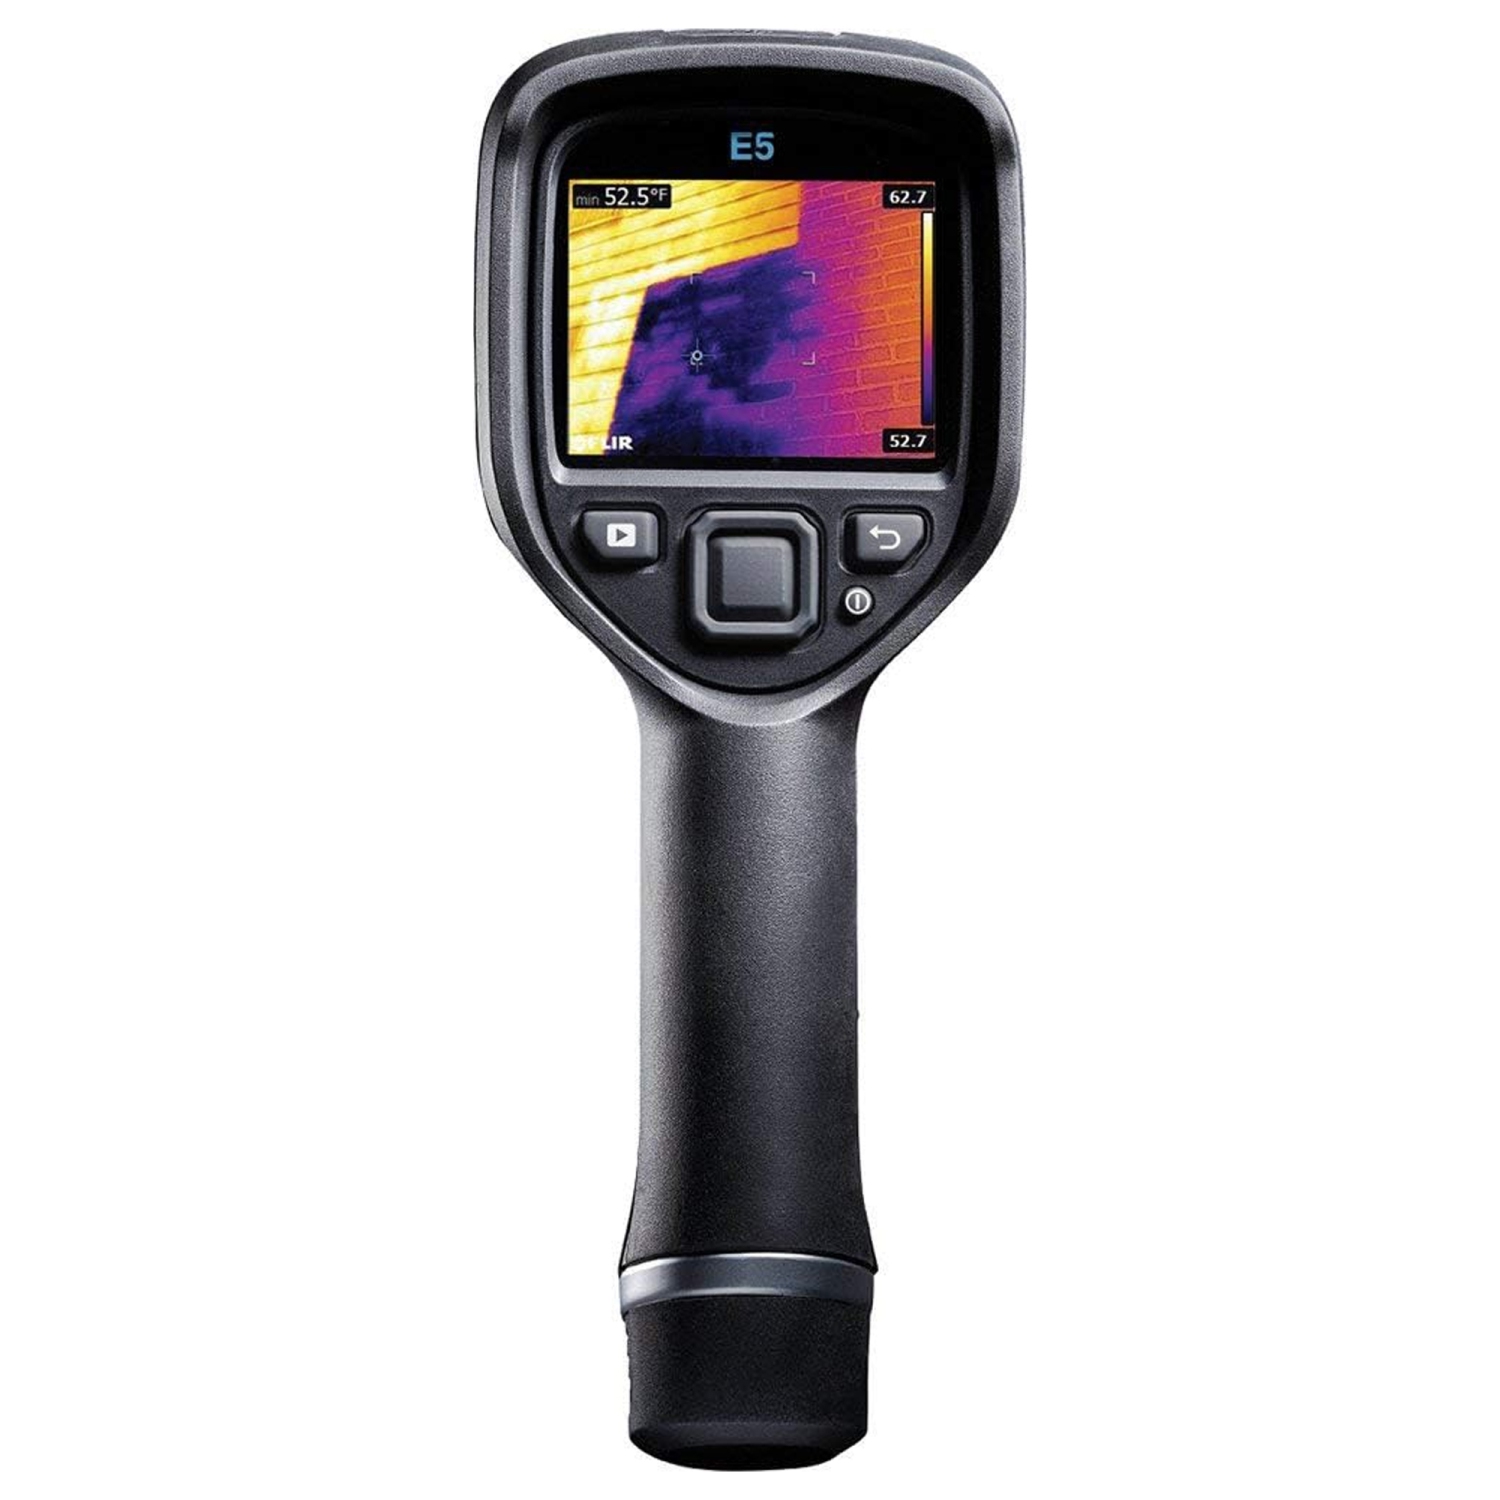 FLIR Compact Thermal Imaging Camera with 120 x 90 IR Resolution, MSX and Wi-Fi